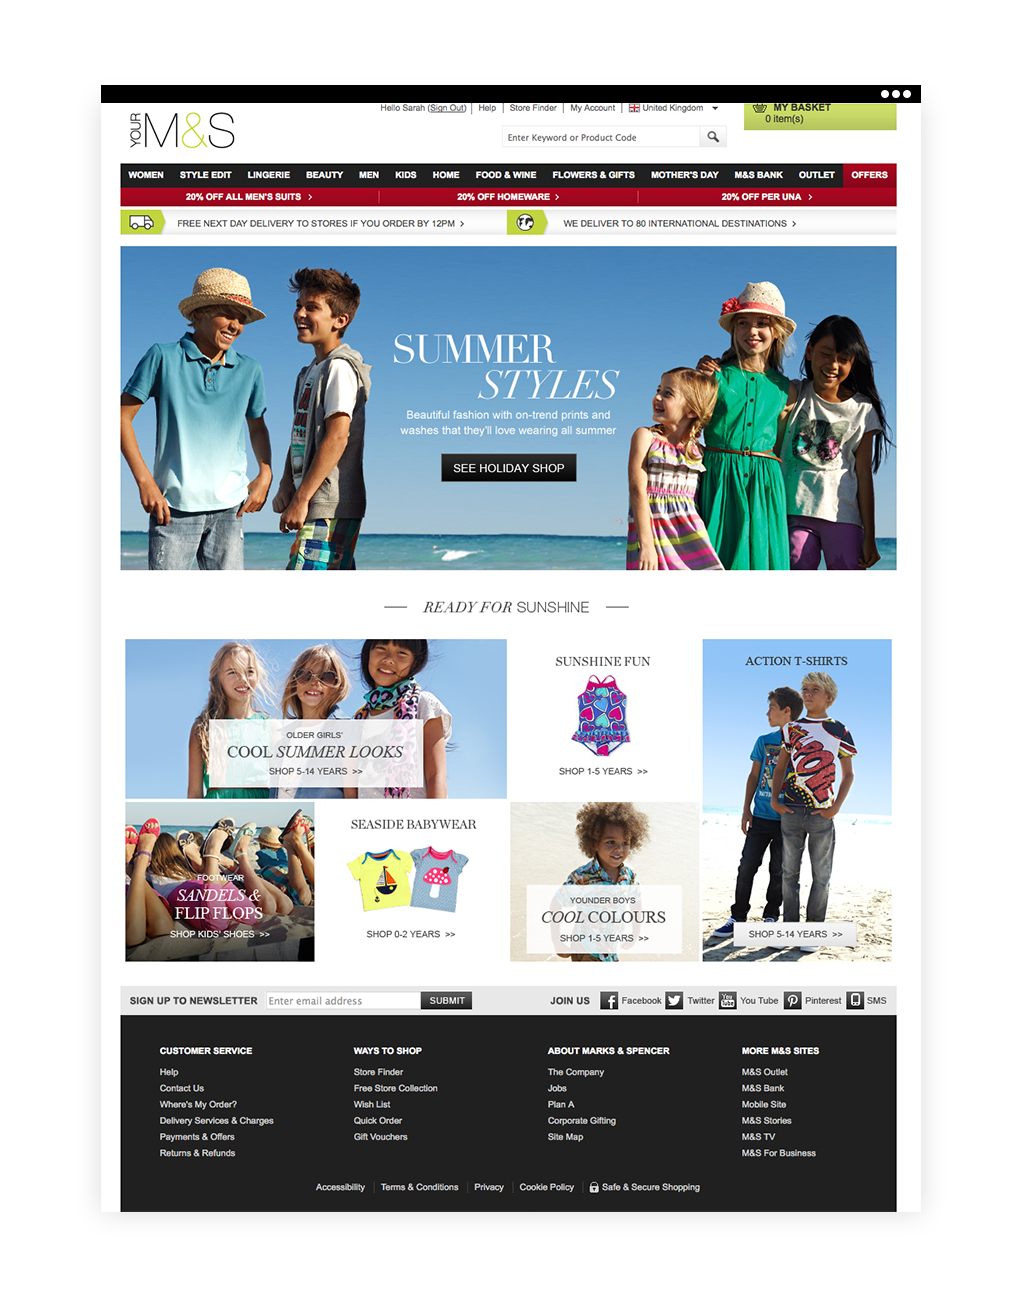 marks-and-spencer-homepage-concept